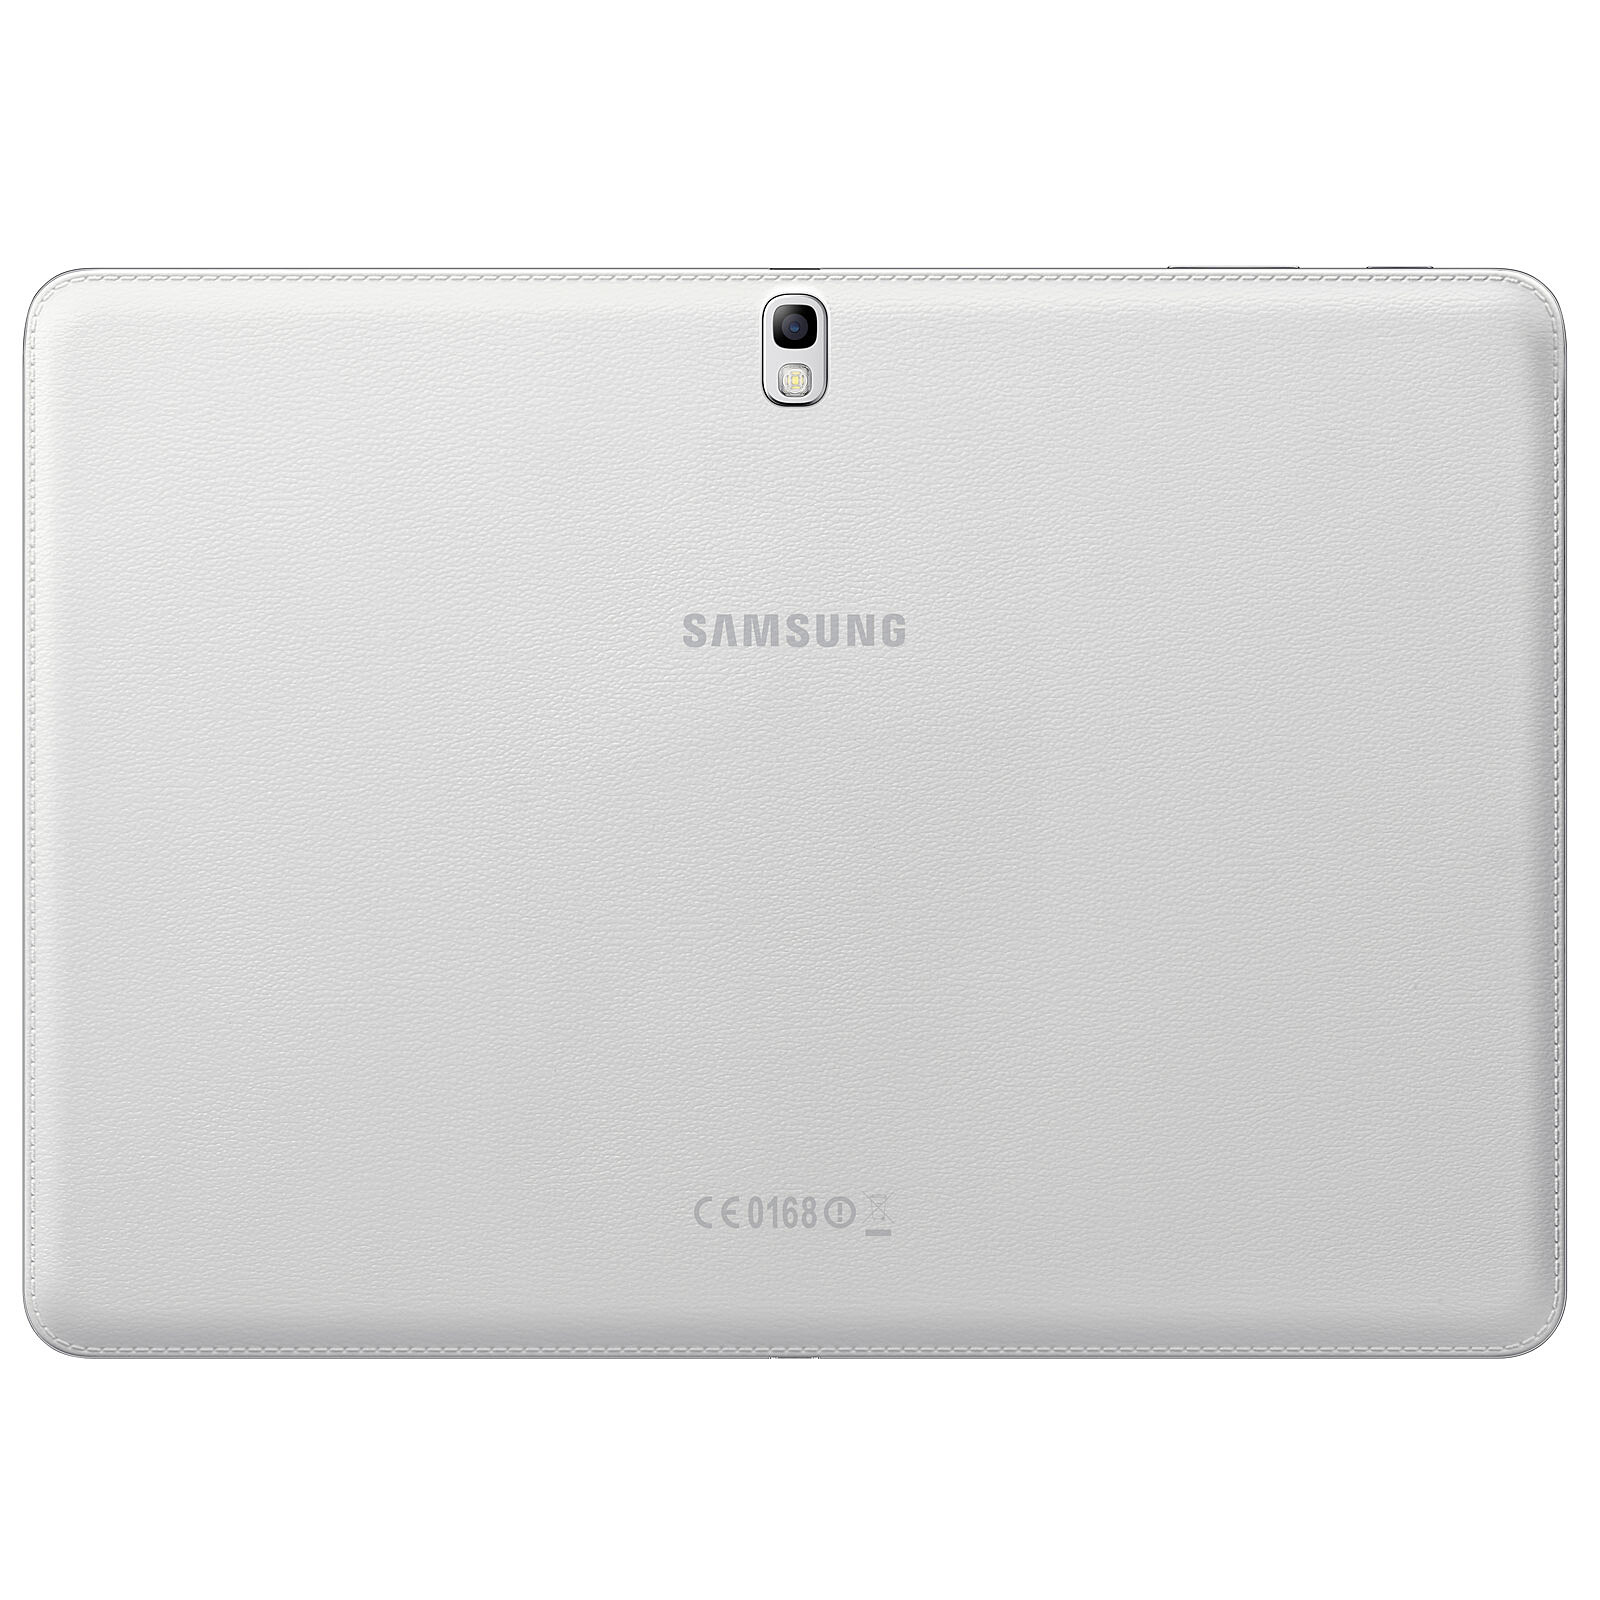 Galaxy Tab : tablette Samsung 10.1 pouces 16 Go Android pas cher